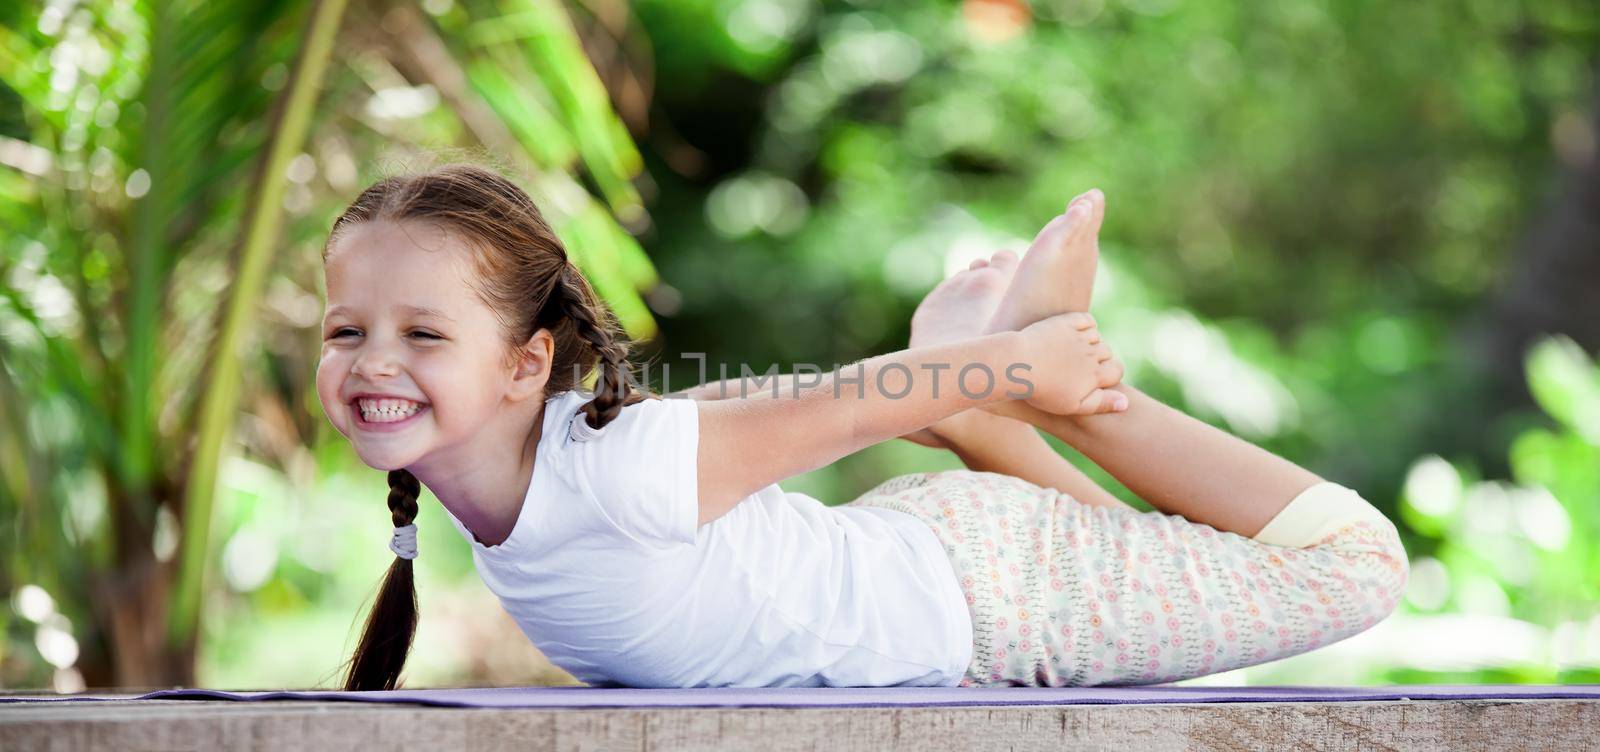 Child doing exercise on wooden platform outdoors. Healthy lifestyle. Yoga girl